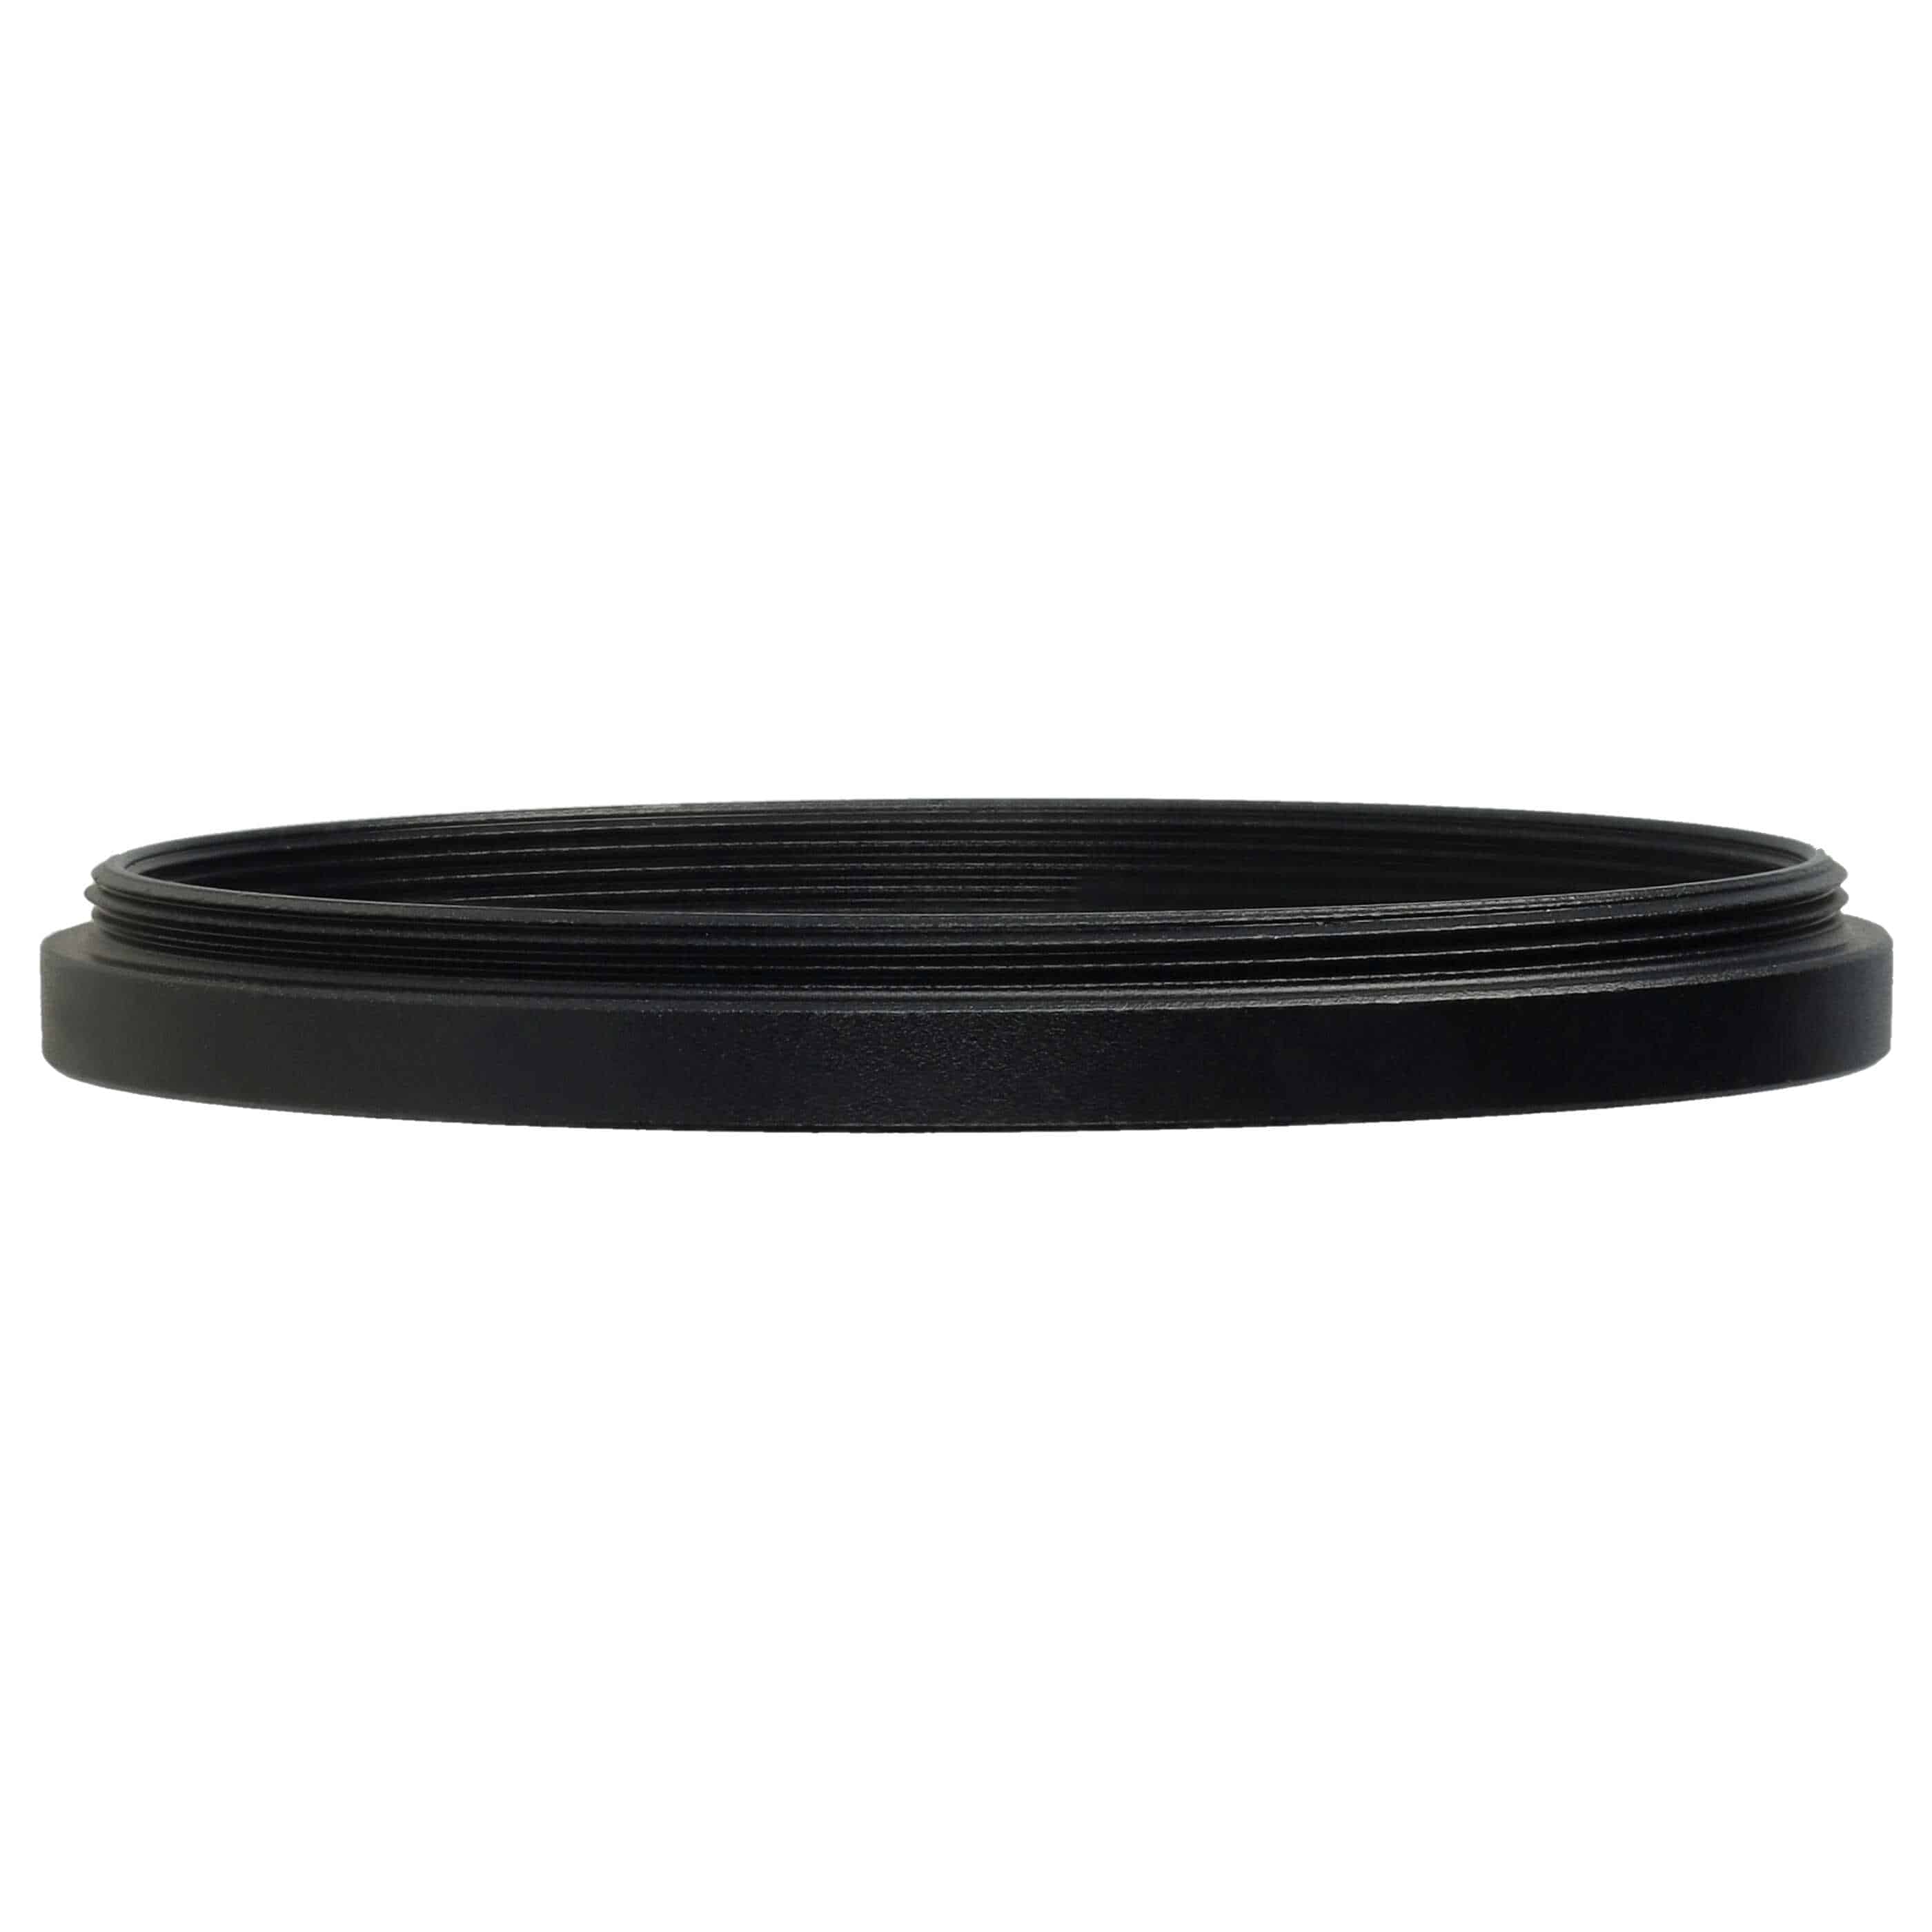 Step-Down Ring Adapter from 55 mm to 52 mm for various Camera Lenses